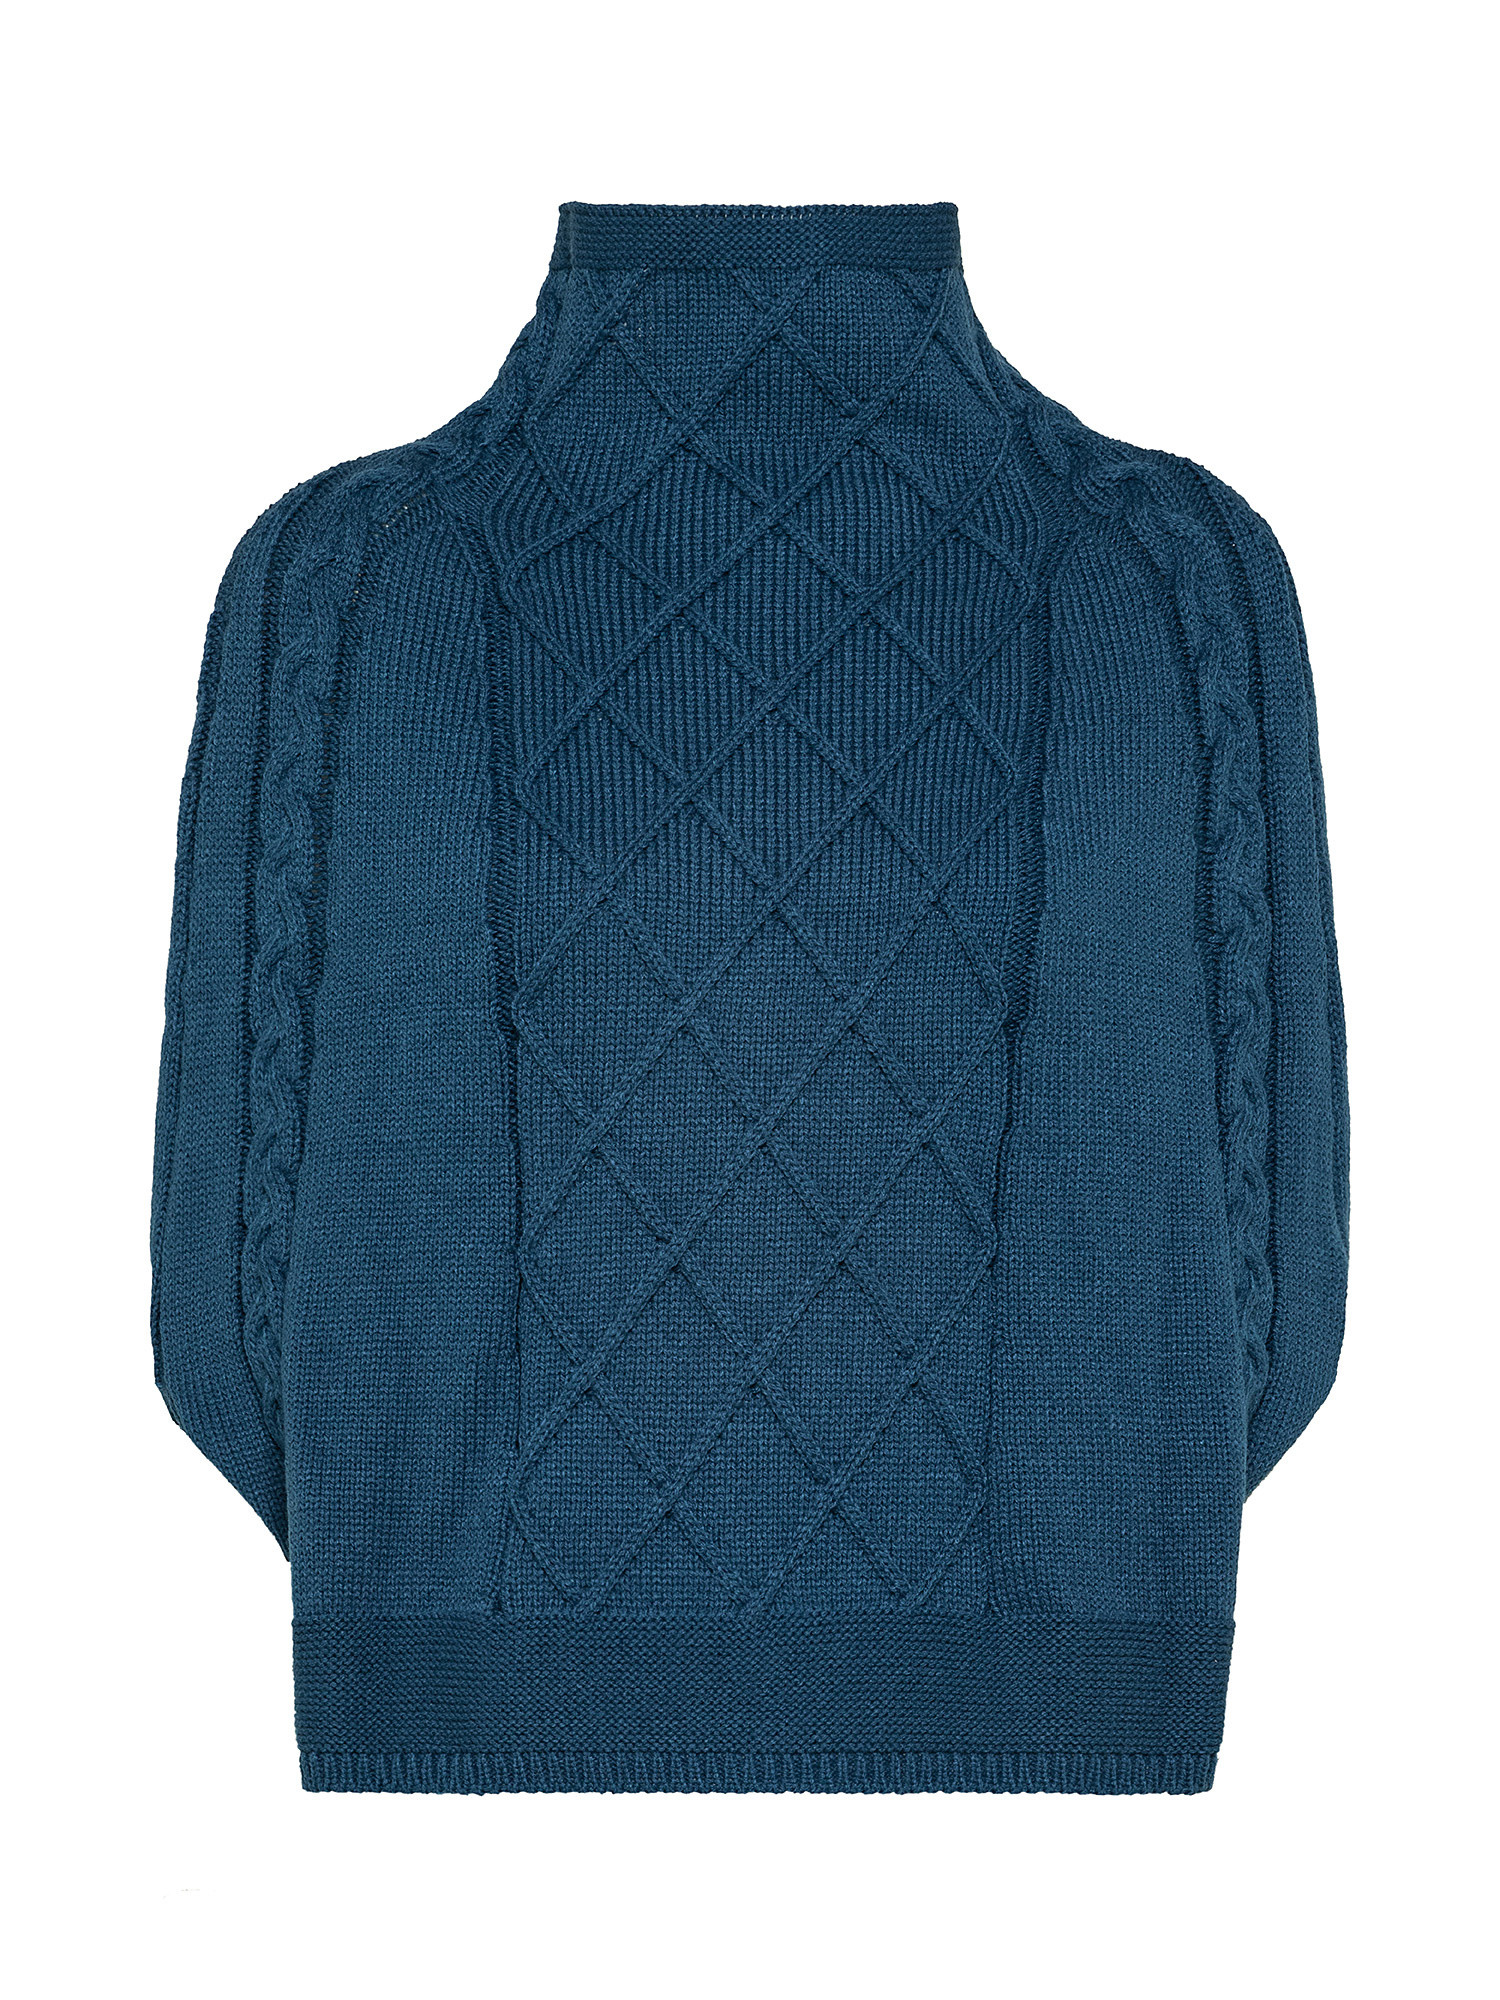 Poncho with diamond stitch, Green teal, large image number 0